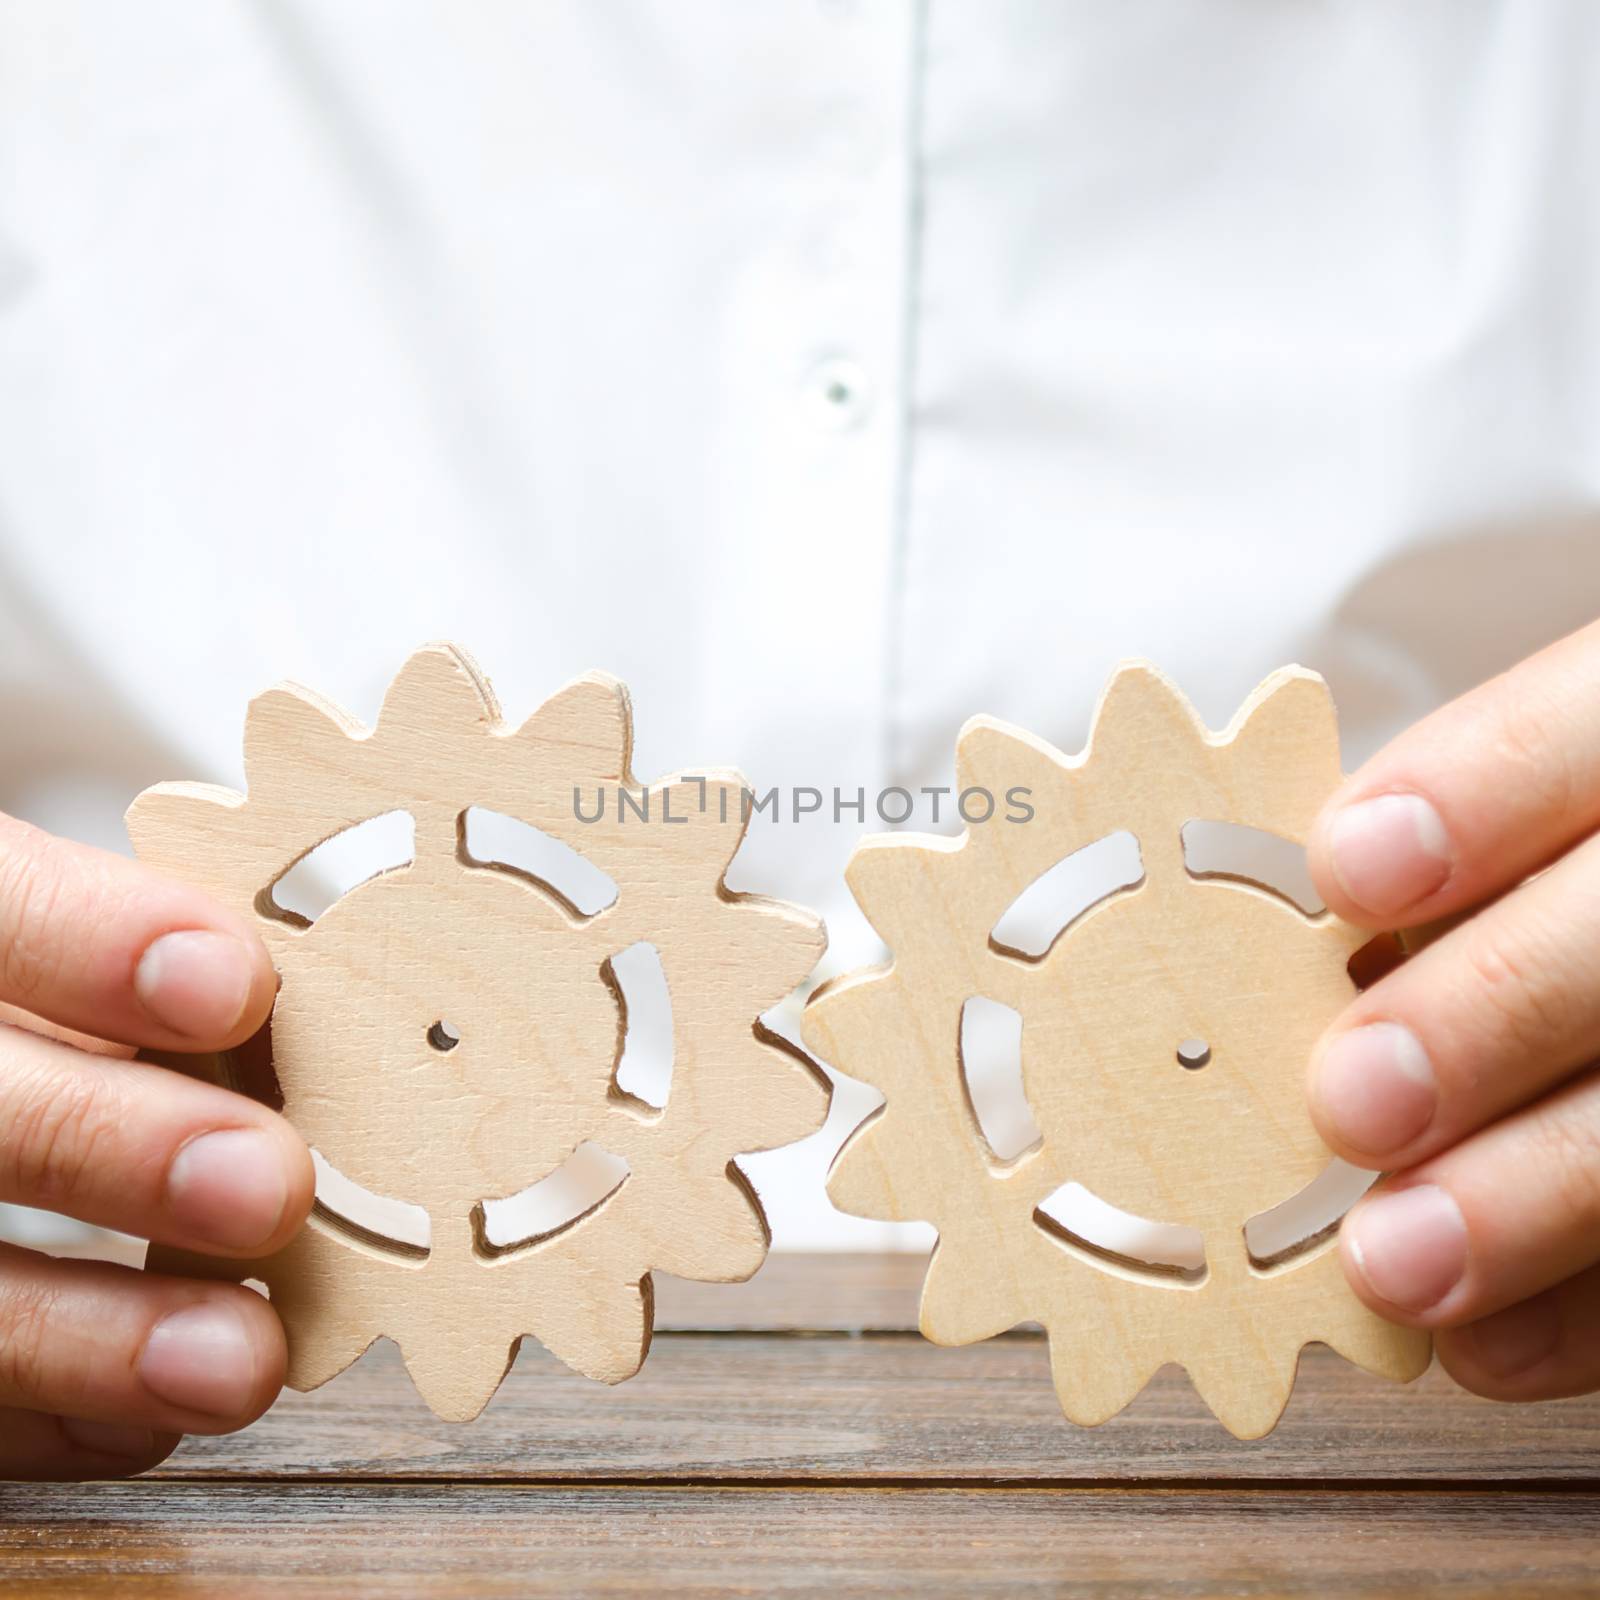 Businessman in white shirt connects two wooden gears. Improving work efficiency, establishing new connections and suppliers. Symbolism of establishing business processes and communication.